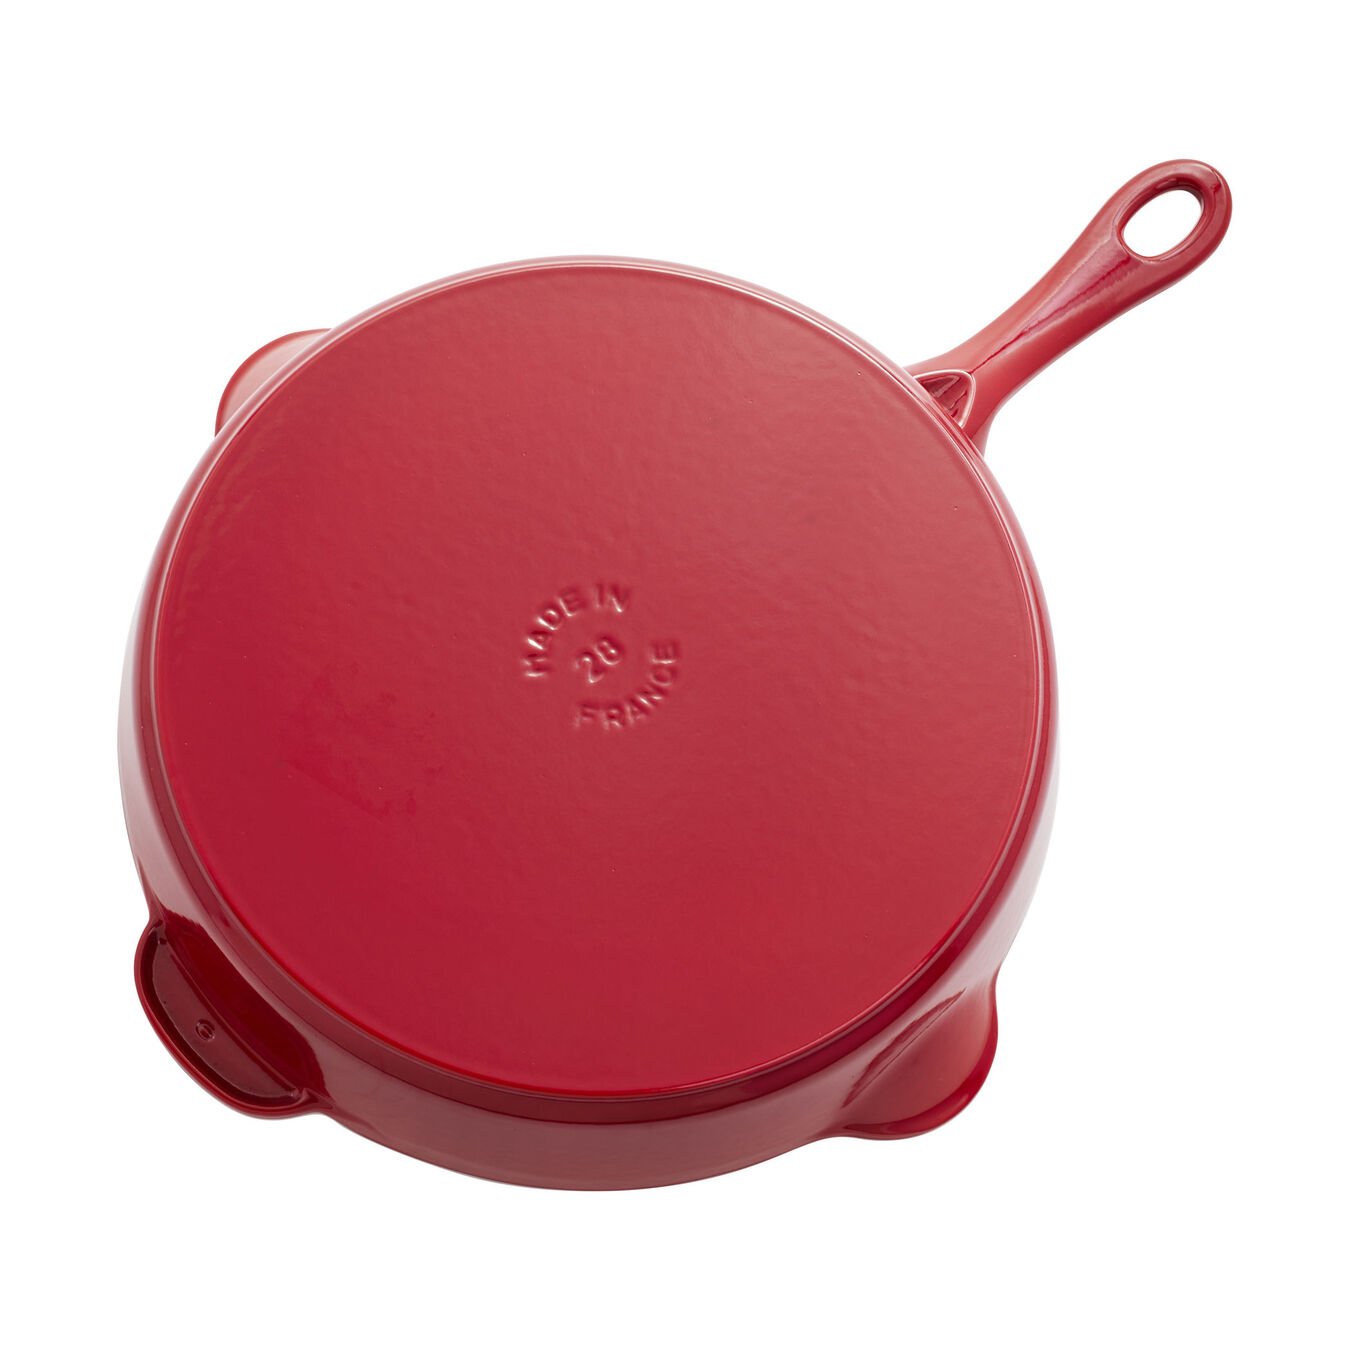 28 cm / 11 inch cast iron Frying pan, cherry - Visual Imperfections,,large 4